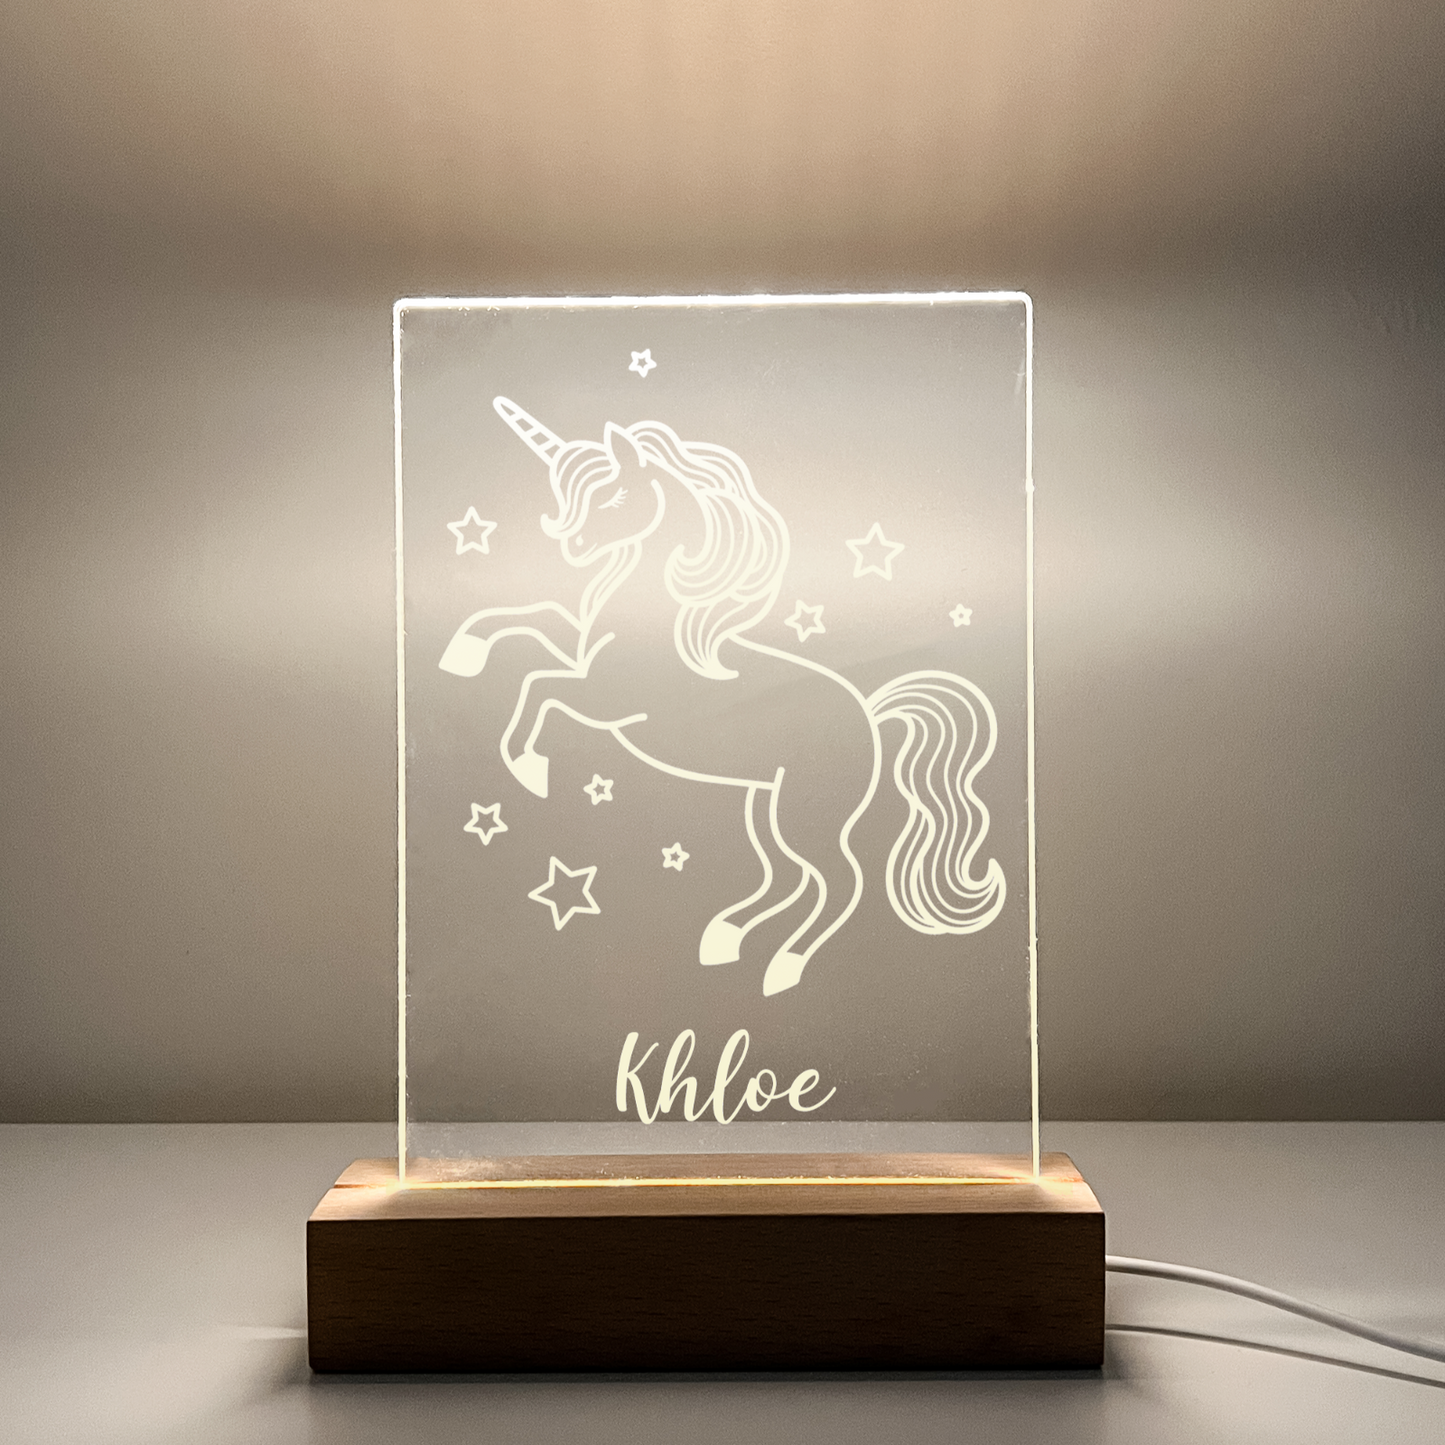 Personalized LED Light Up Desk Lamp Wood Base Stand Girls rainbow Gift For Her